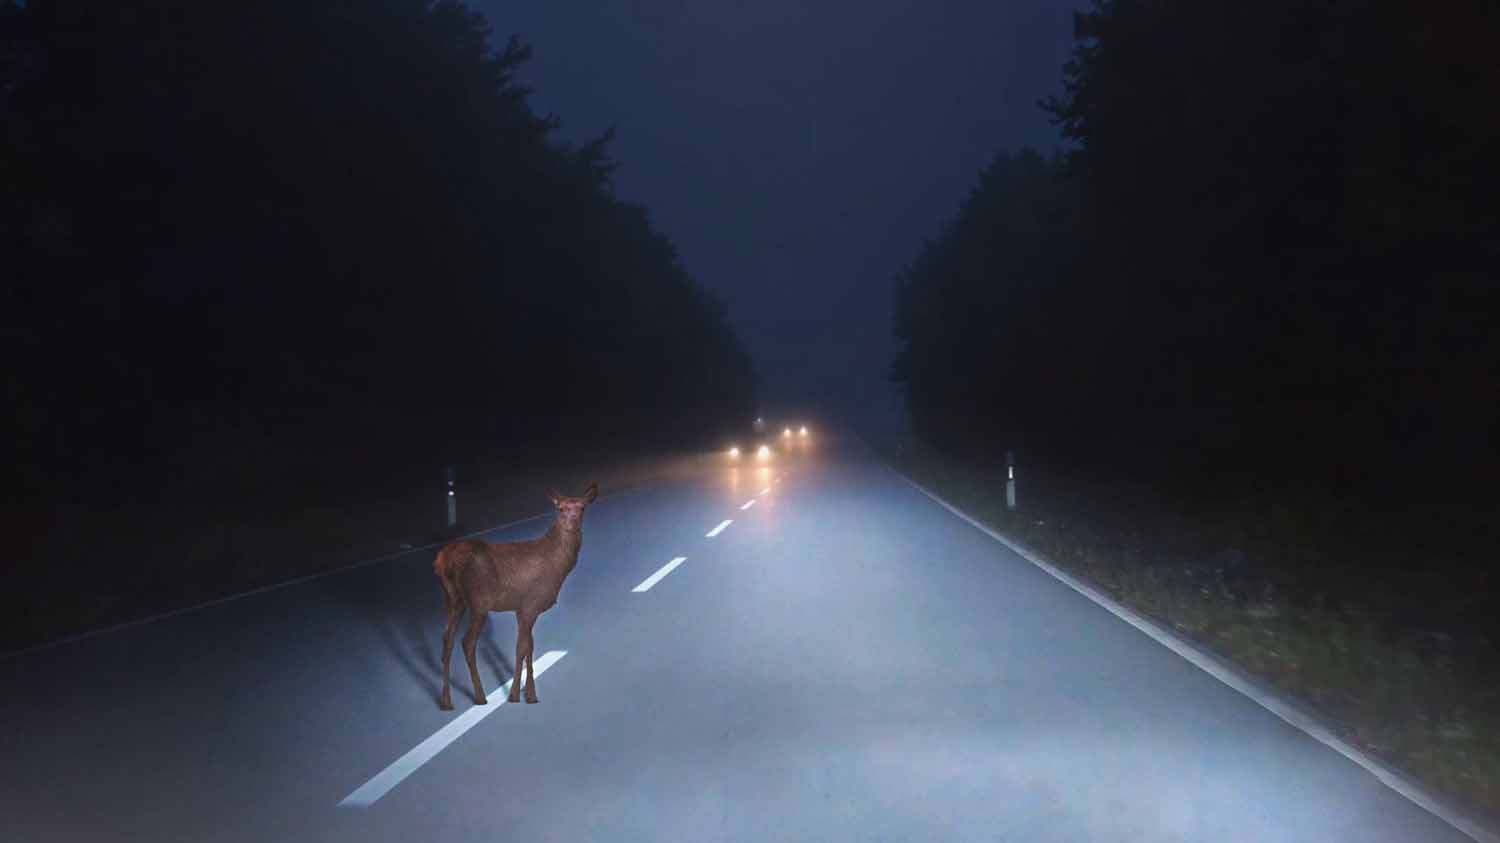 Deer in the road at night with two cars oncoming